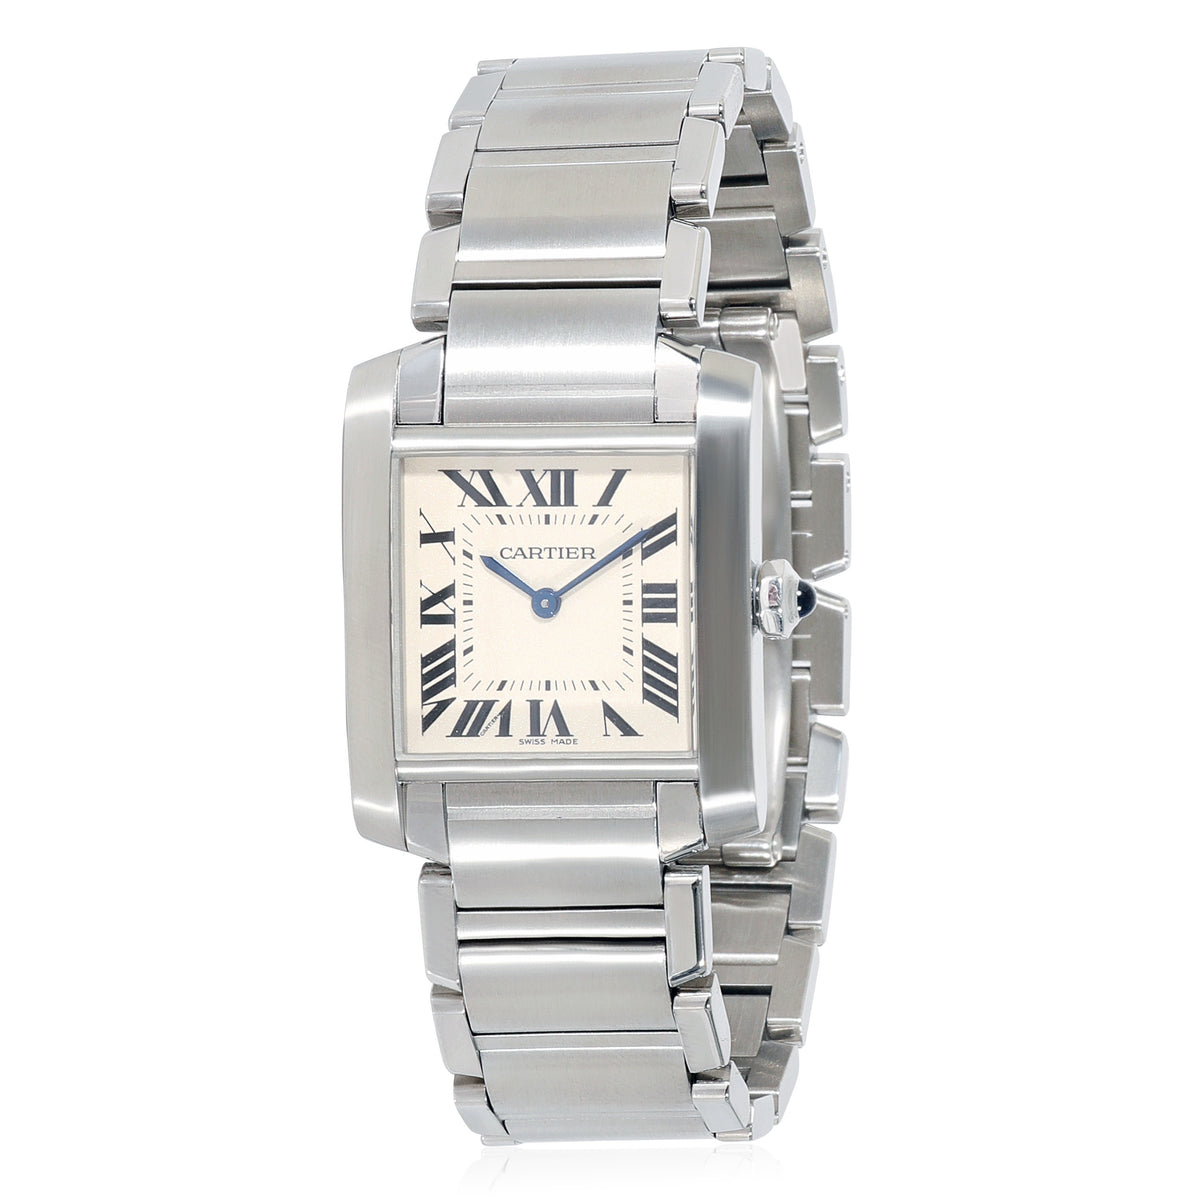 Cartier Tank Francaise WSTA0005 Unisex Watch in  Stainless Steel